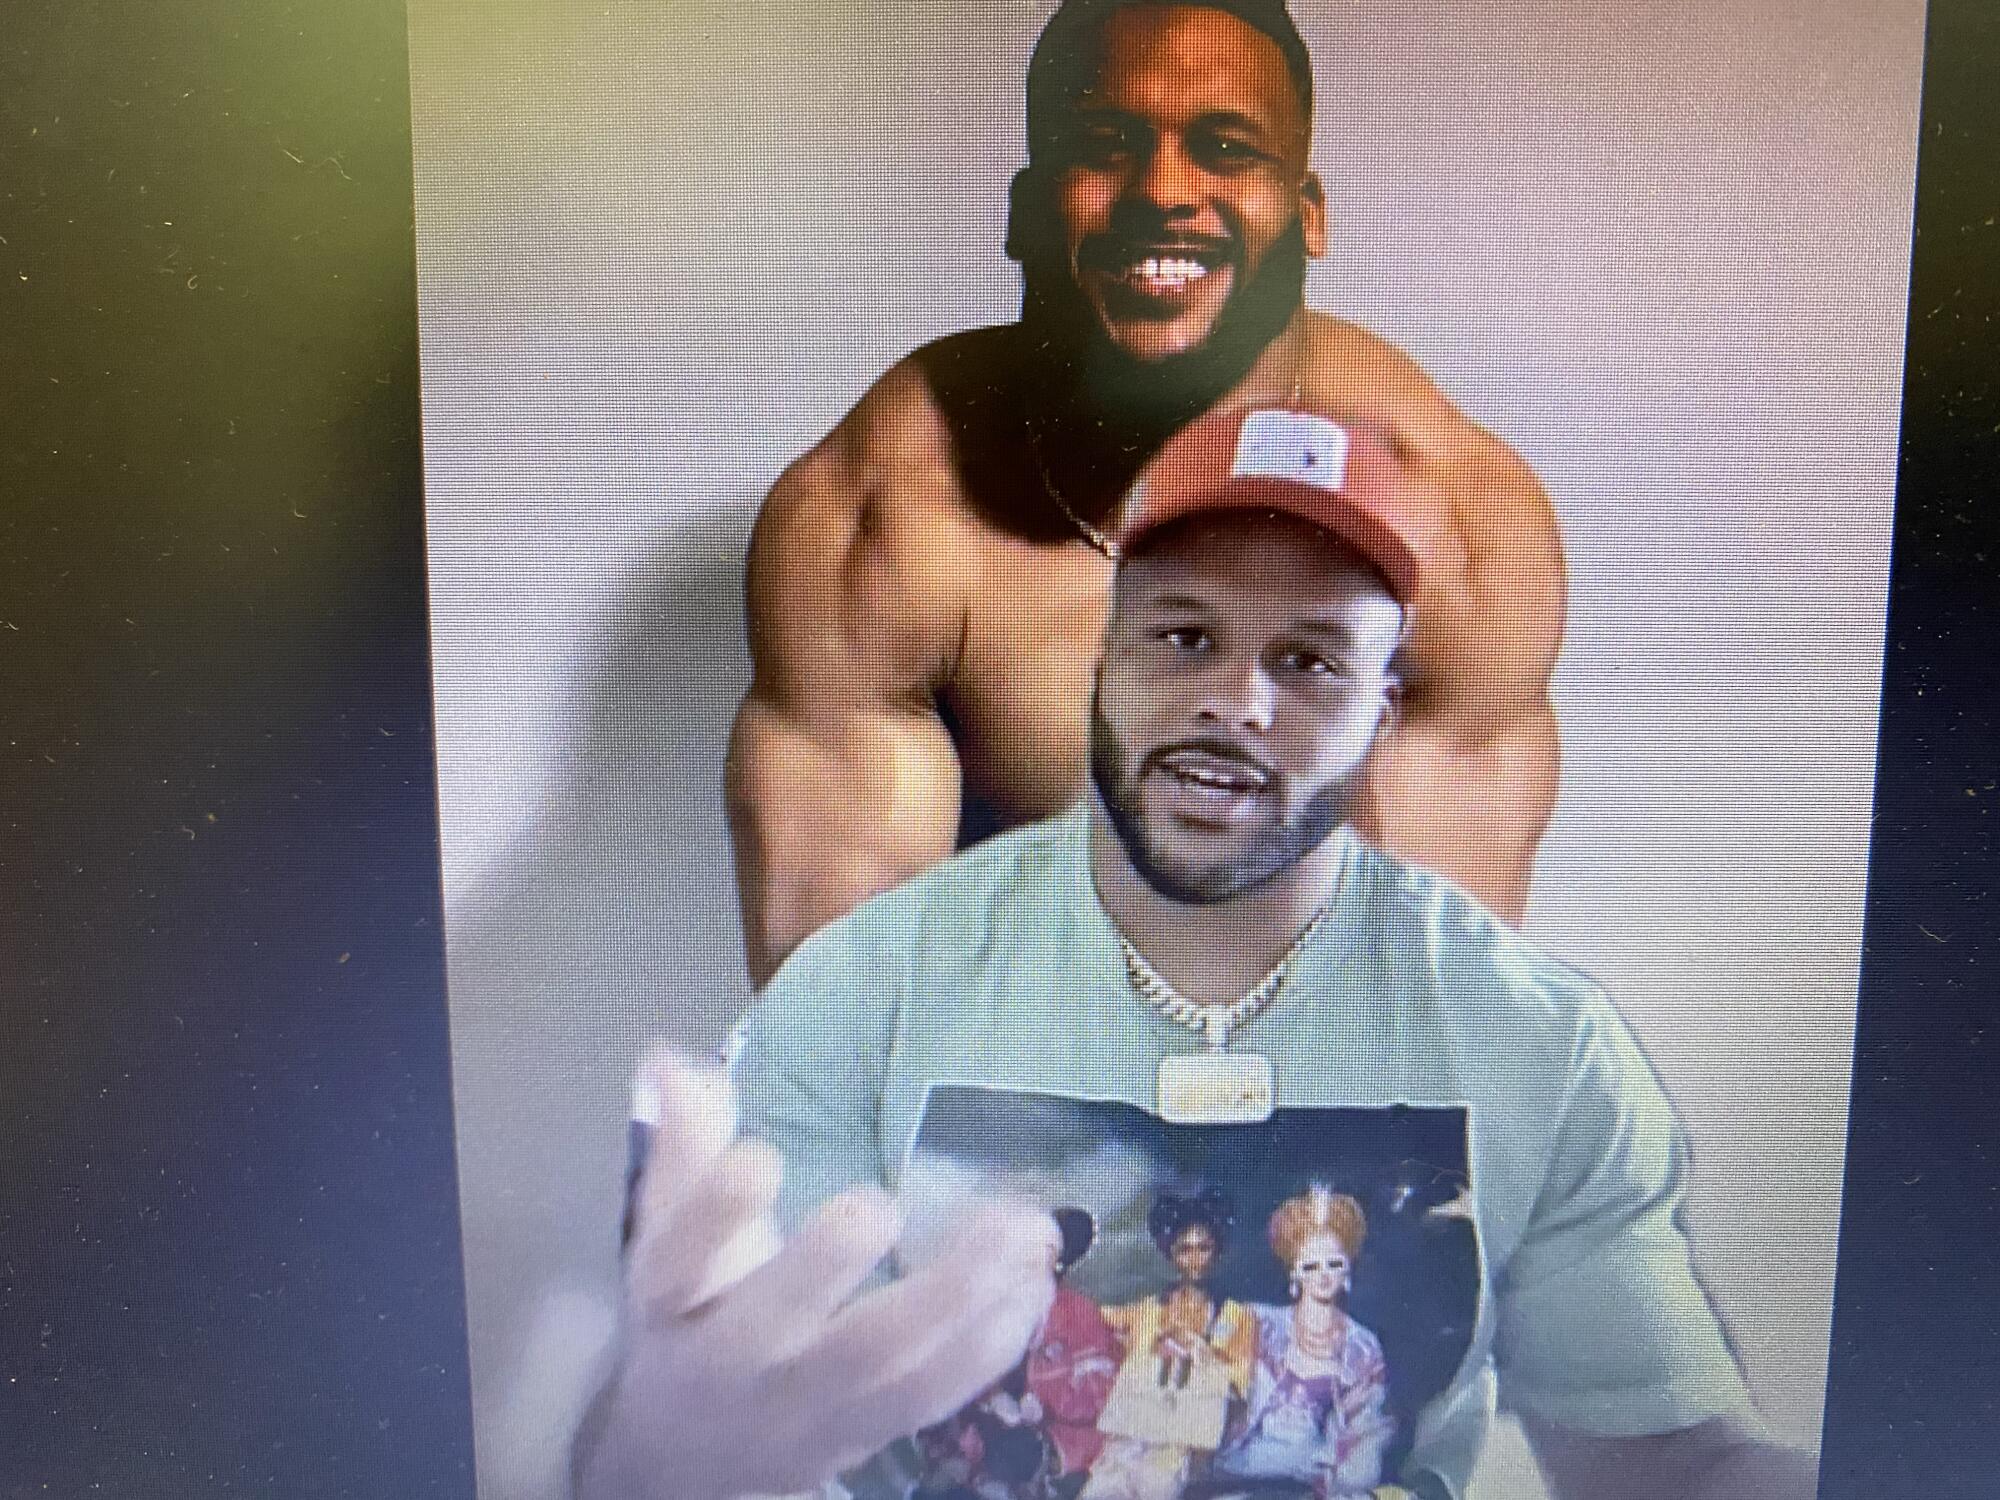 Rams defensive tackle Aaron Donald used a photo of himself flexing as his background.